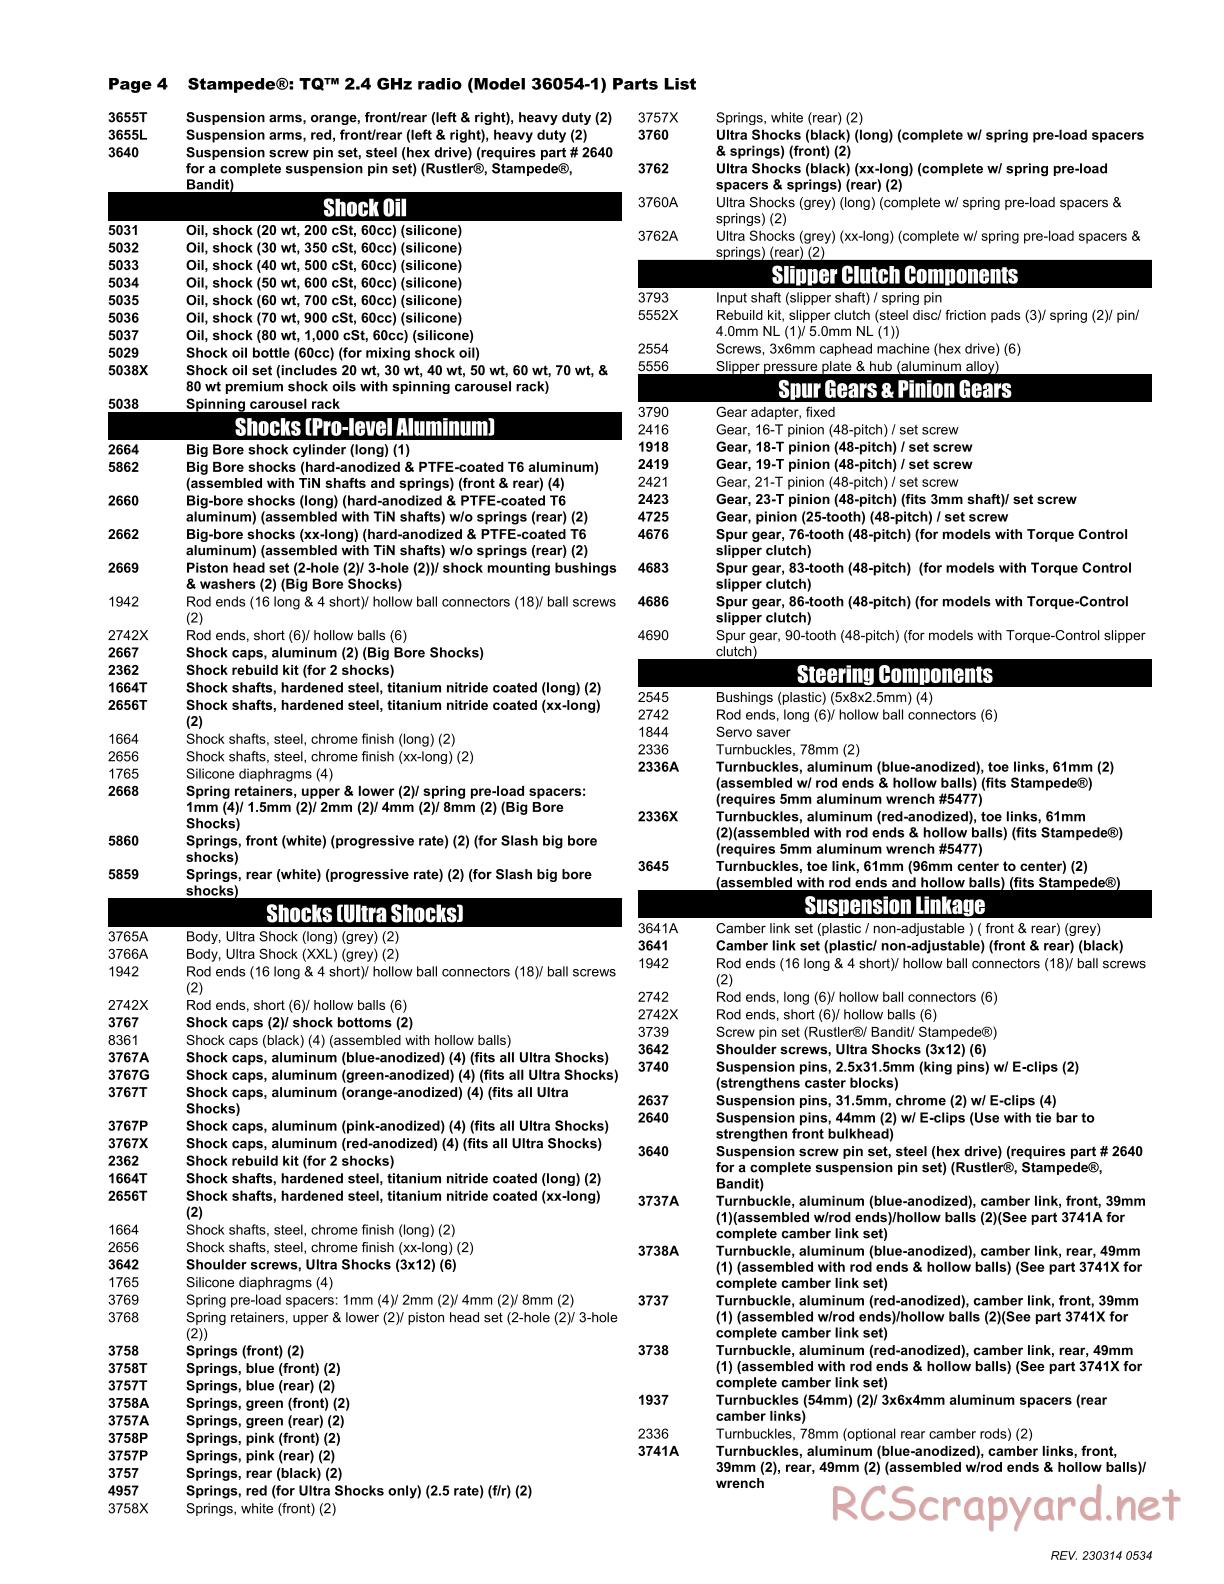 Traxxas - Stampede XL-5 (2018) - Parts List - Page 4